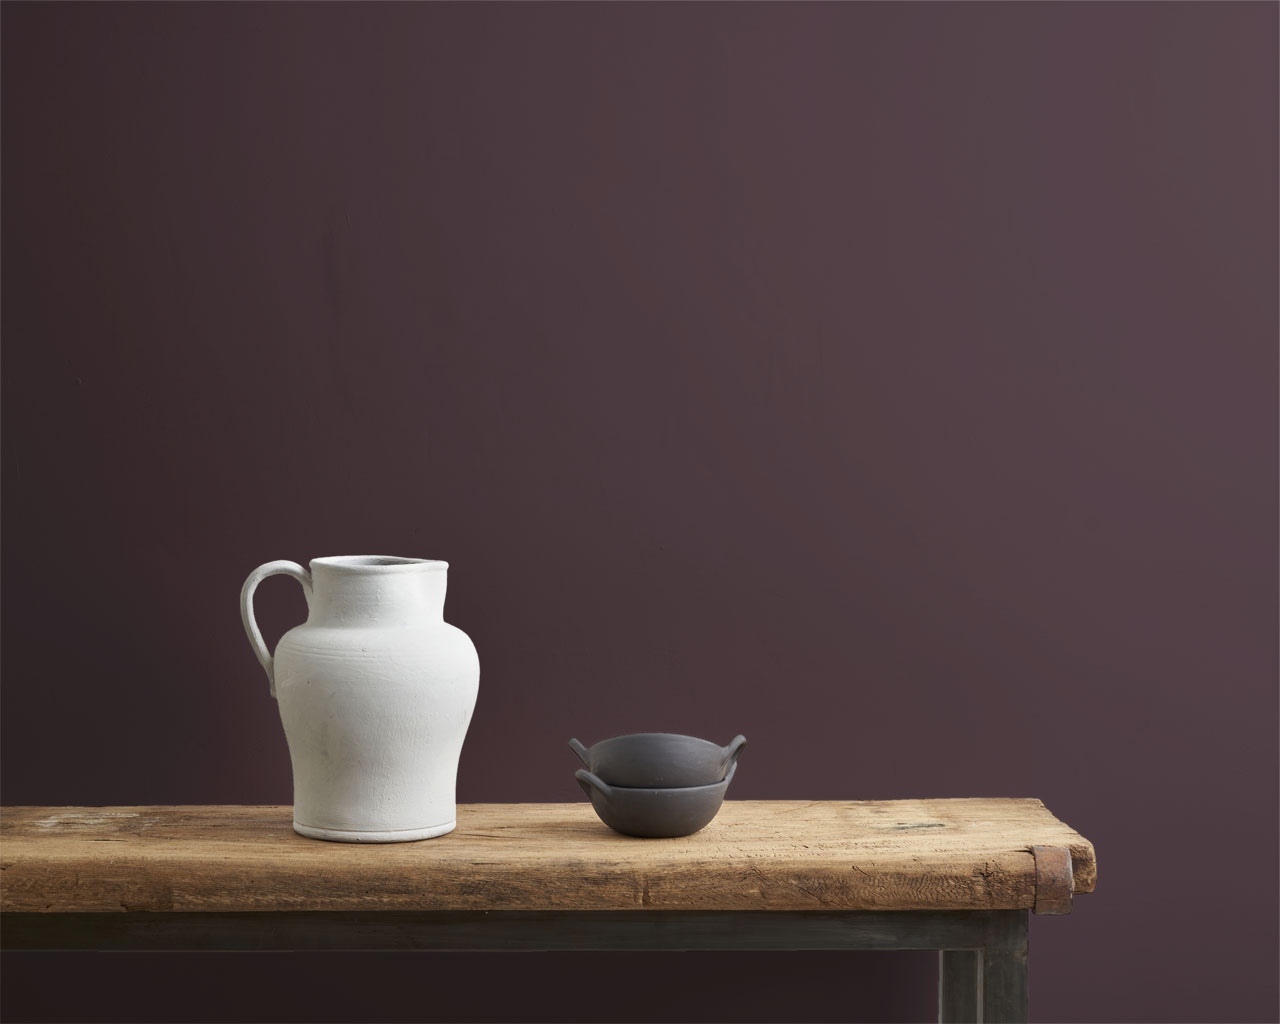 Annie Sloan Tyrian Plum Wall Paint with Black and White Pots